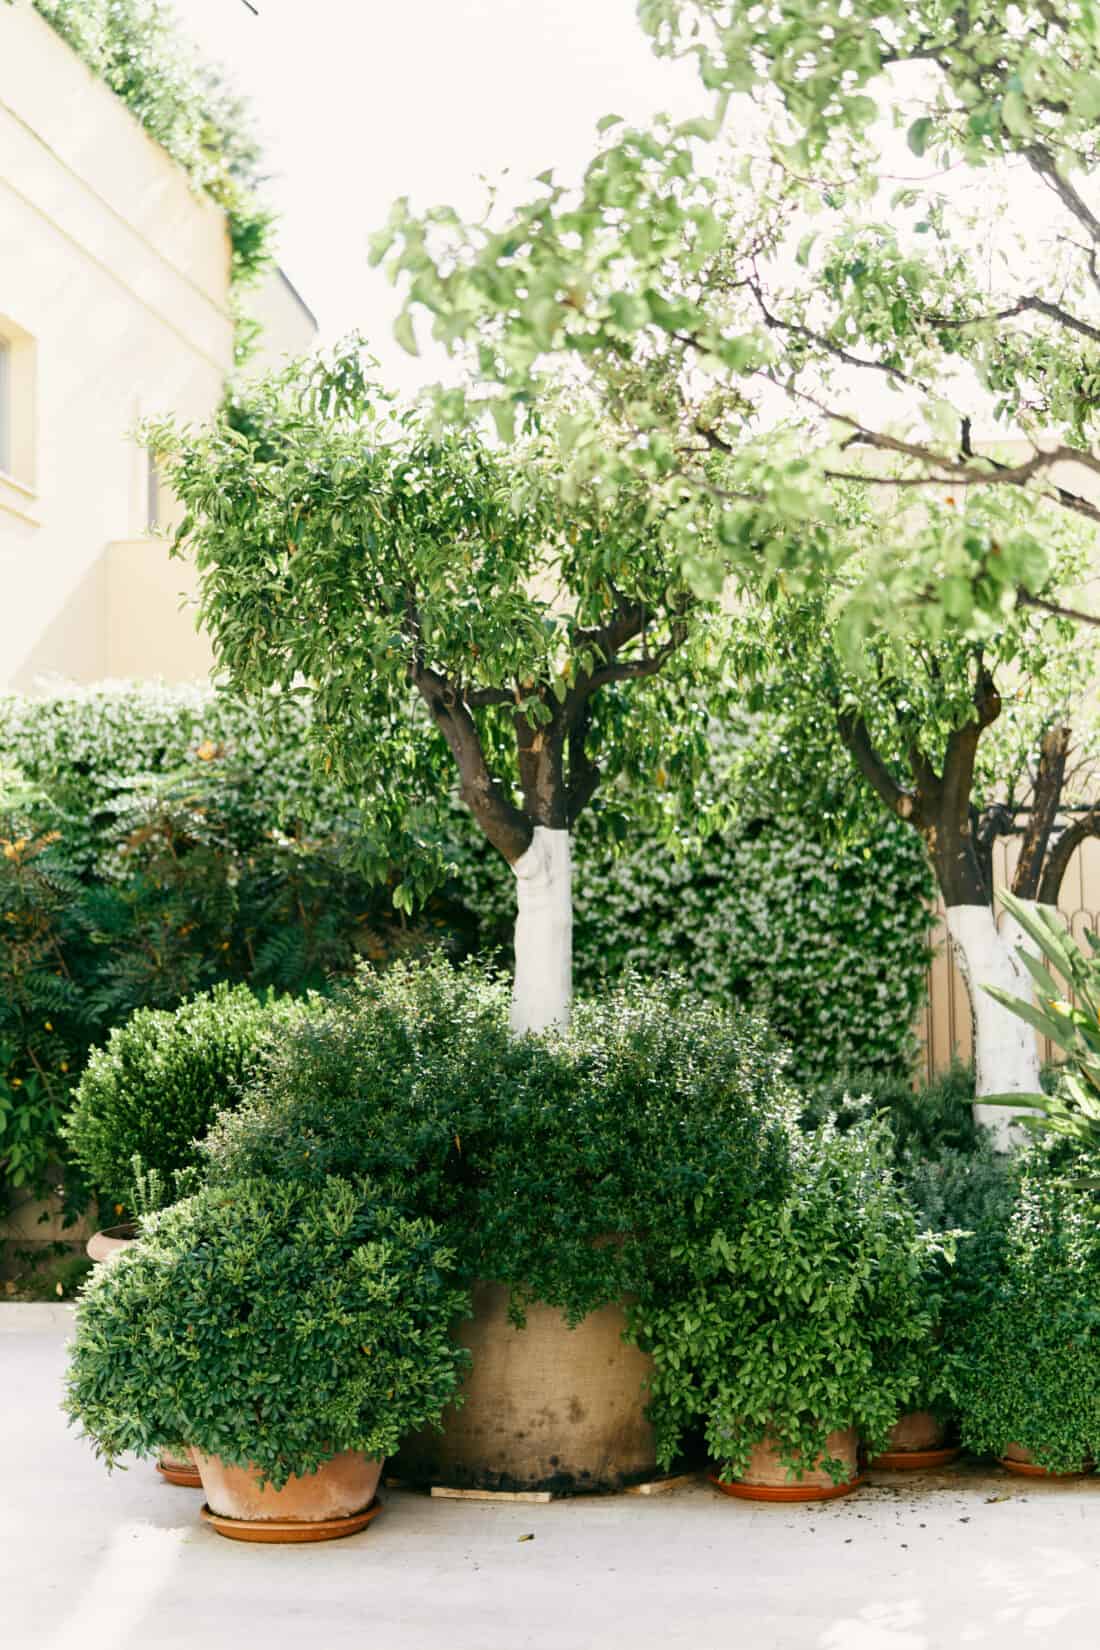 An assortment of evergreen plants arranged in pots within a serene courtyard.